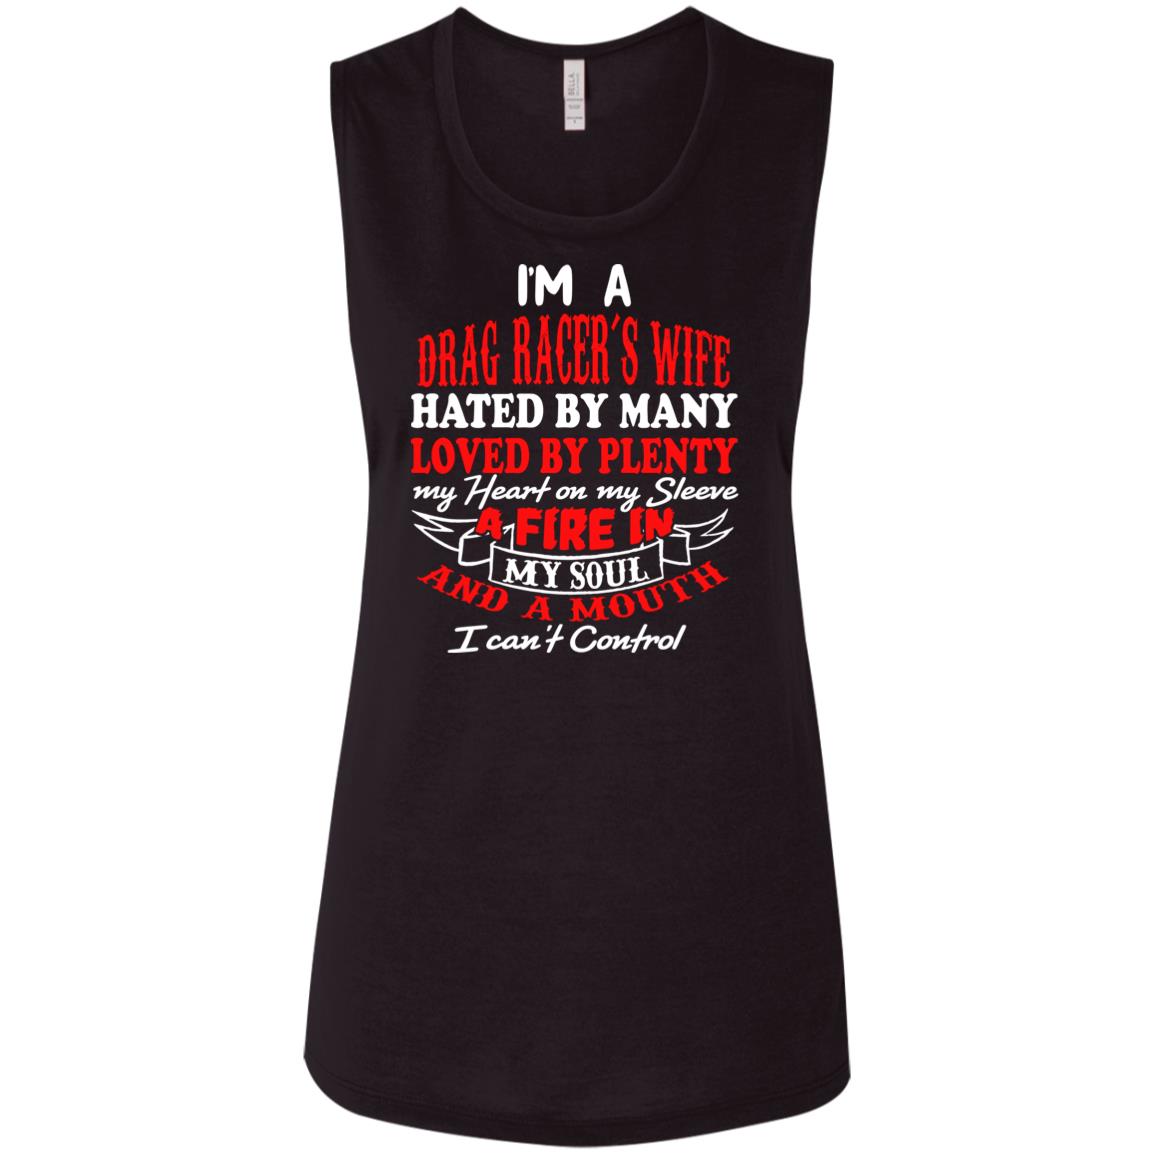 I'm A Drag Racer's Wife Hated By Many Loved By Plenty Ladies' Flowy Muscle Tank